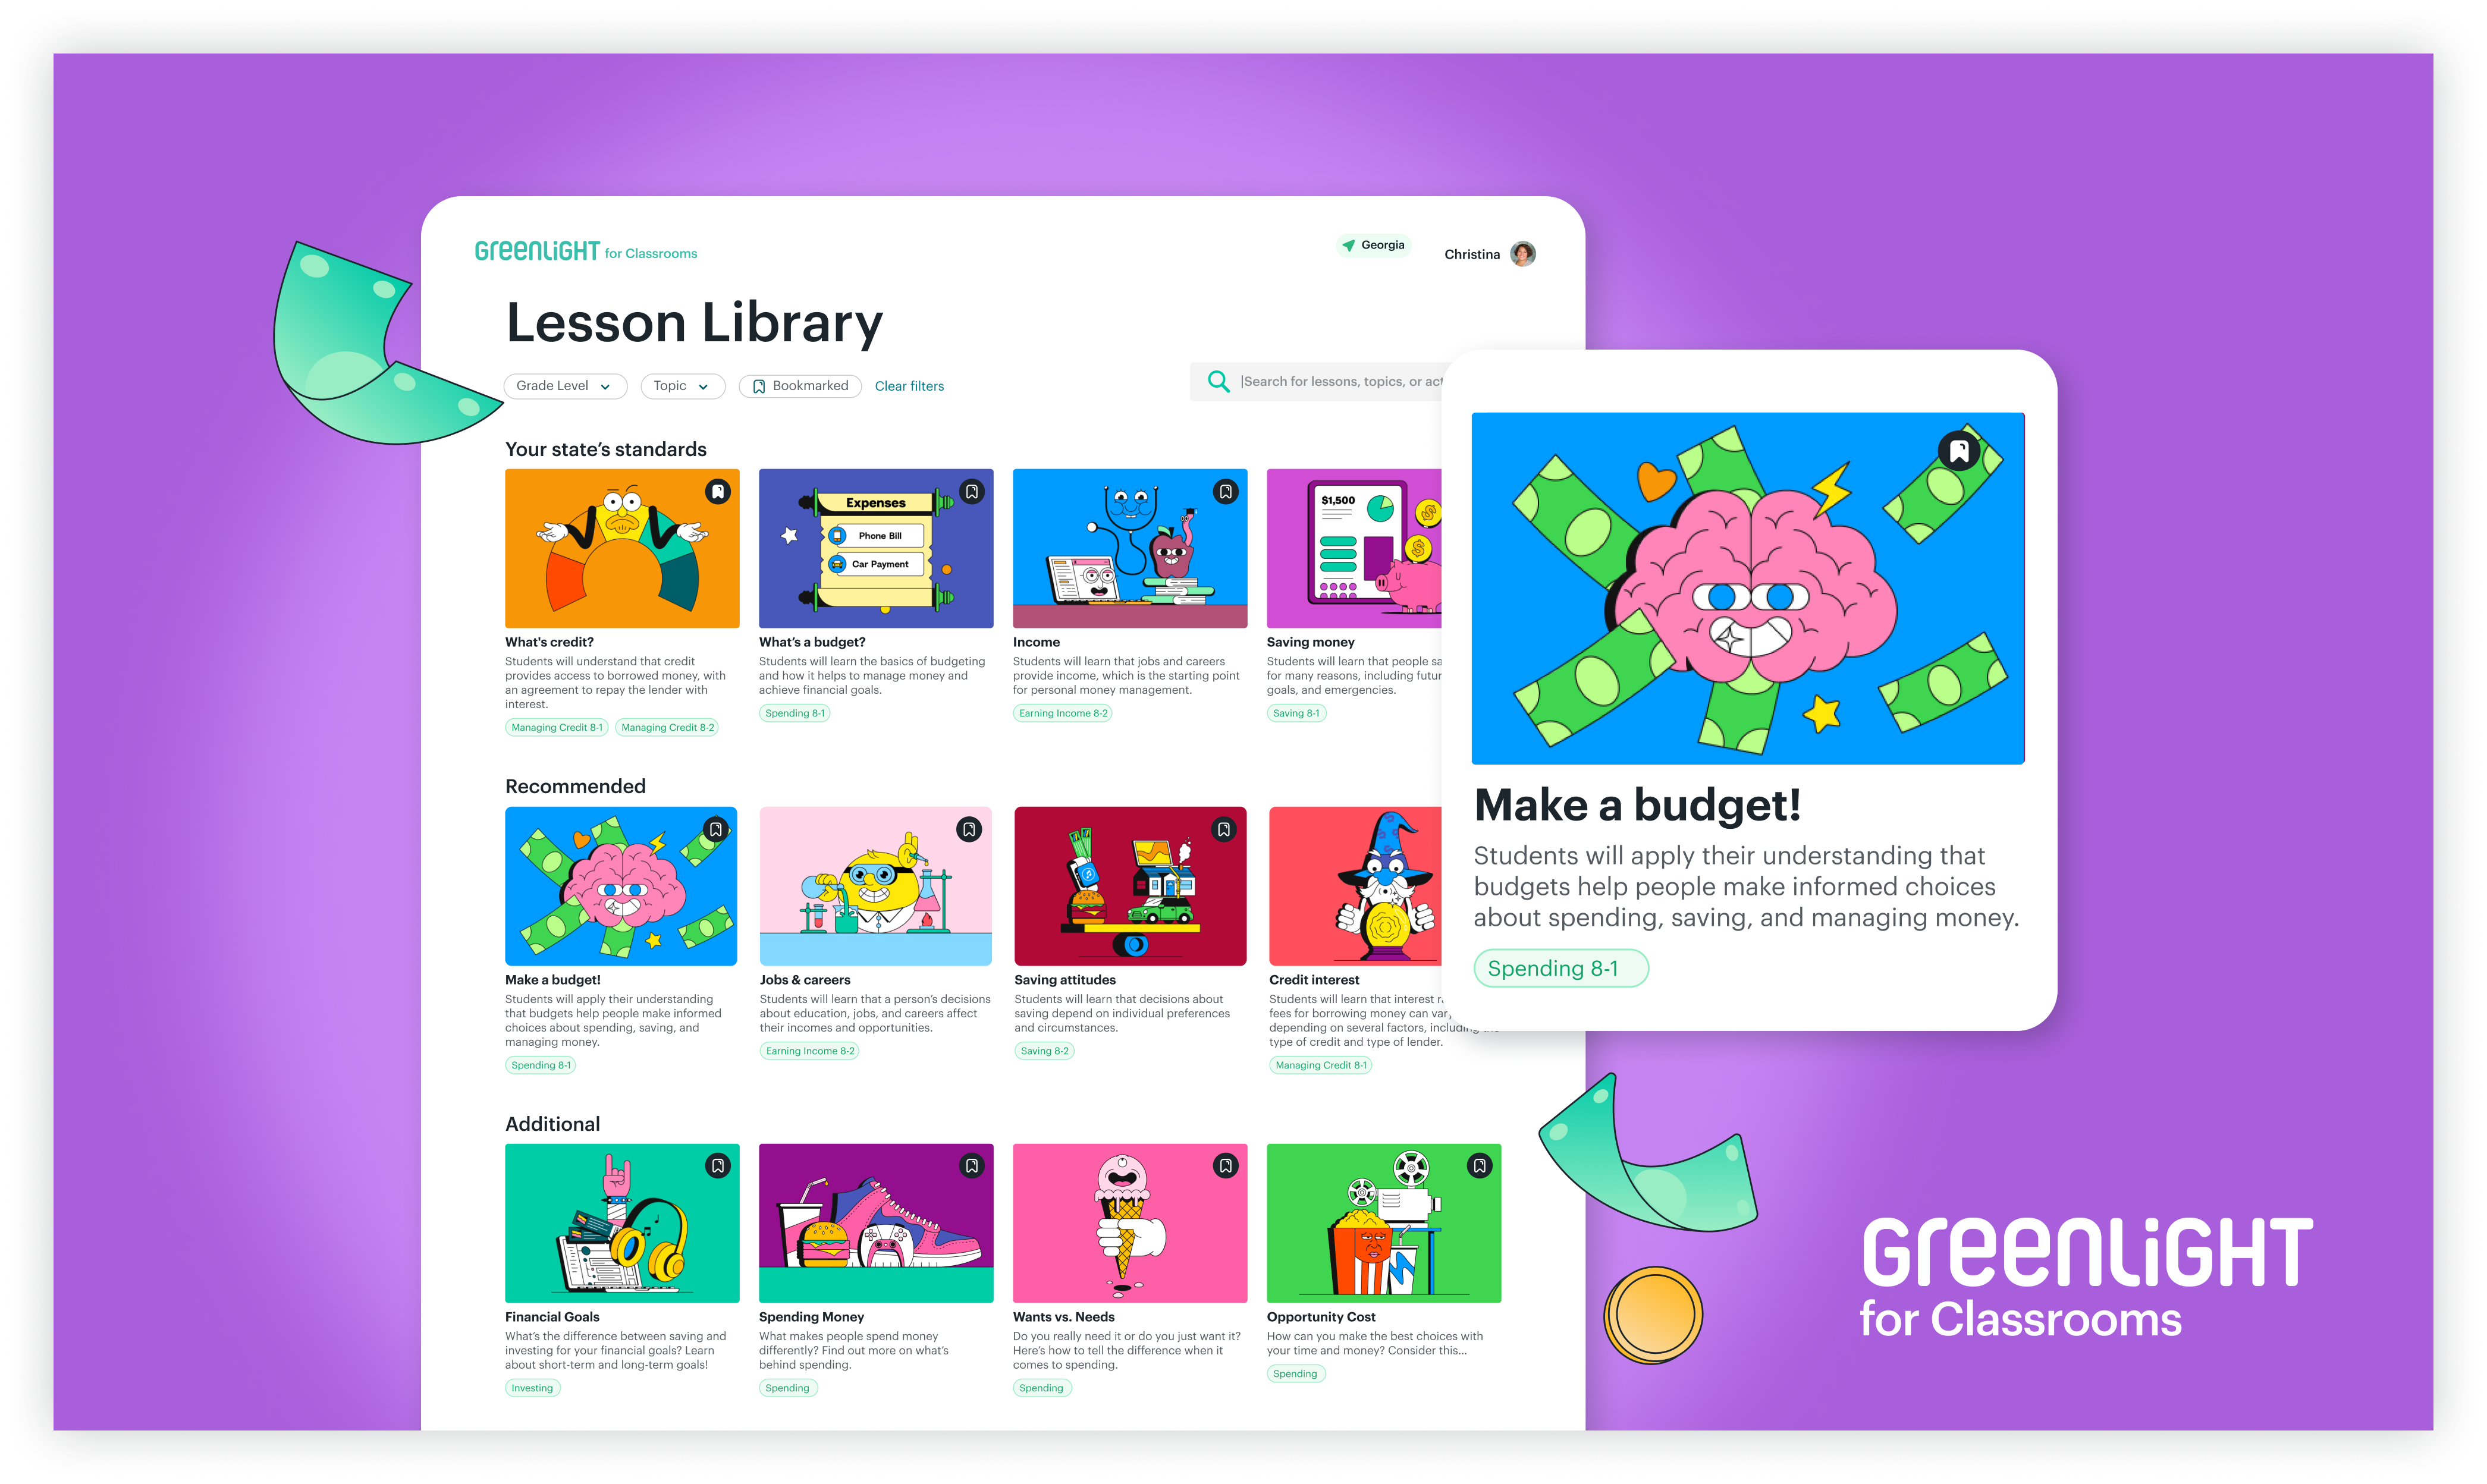 A picture of the lesson library of Greenlight for Classrooms. Each lessons has engaging and colorful art as feature  images. The lessons cover topics like credit, saving attitudes, and opportunity cost. 